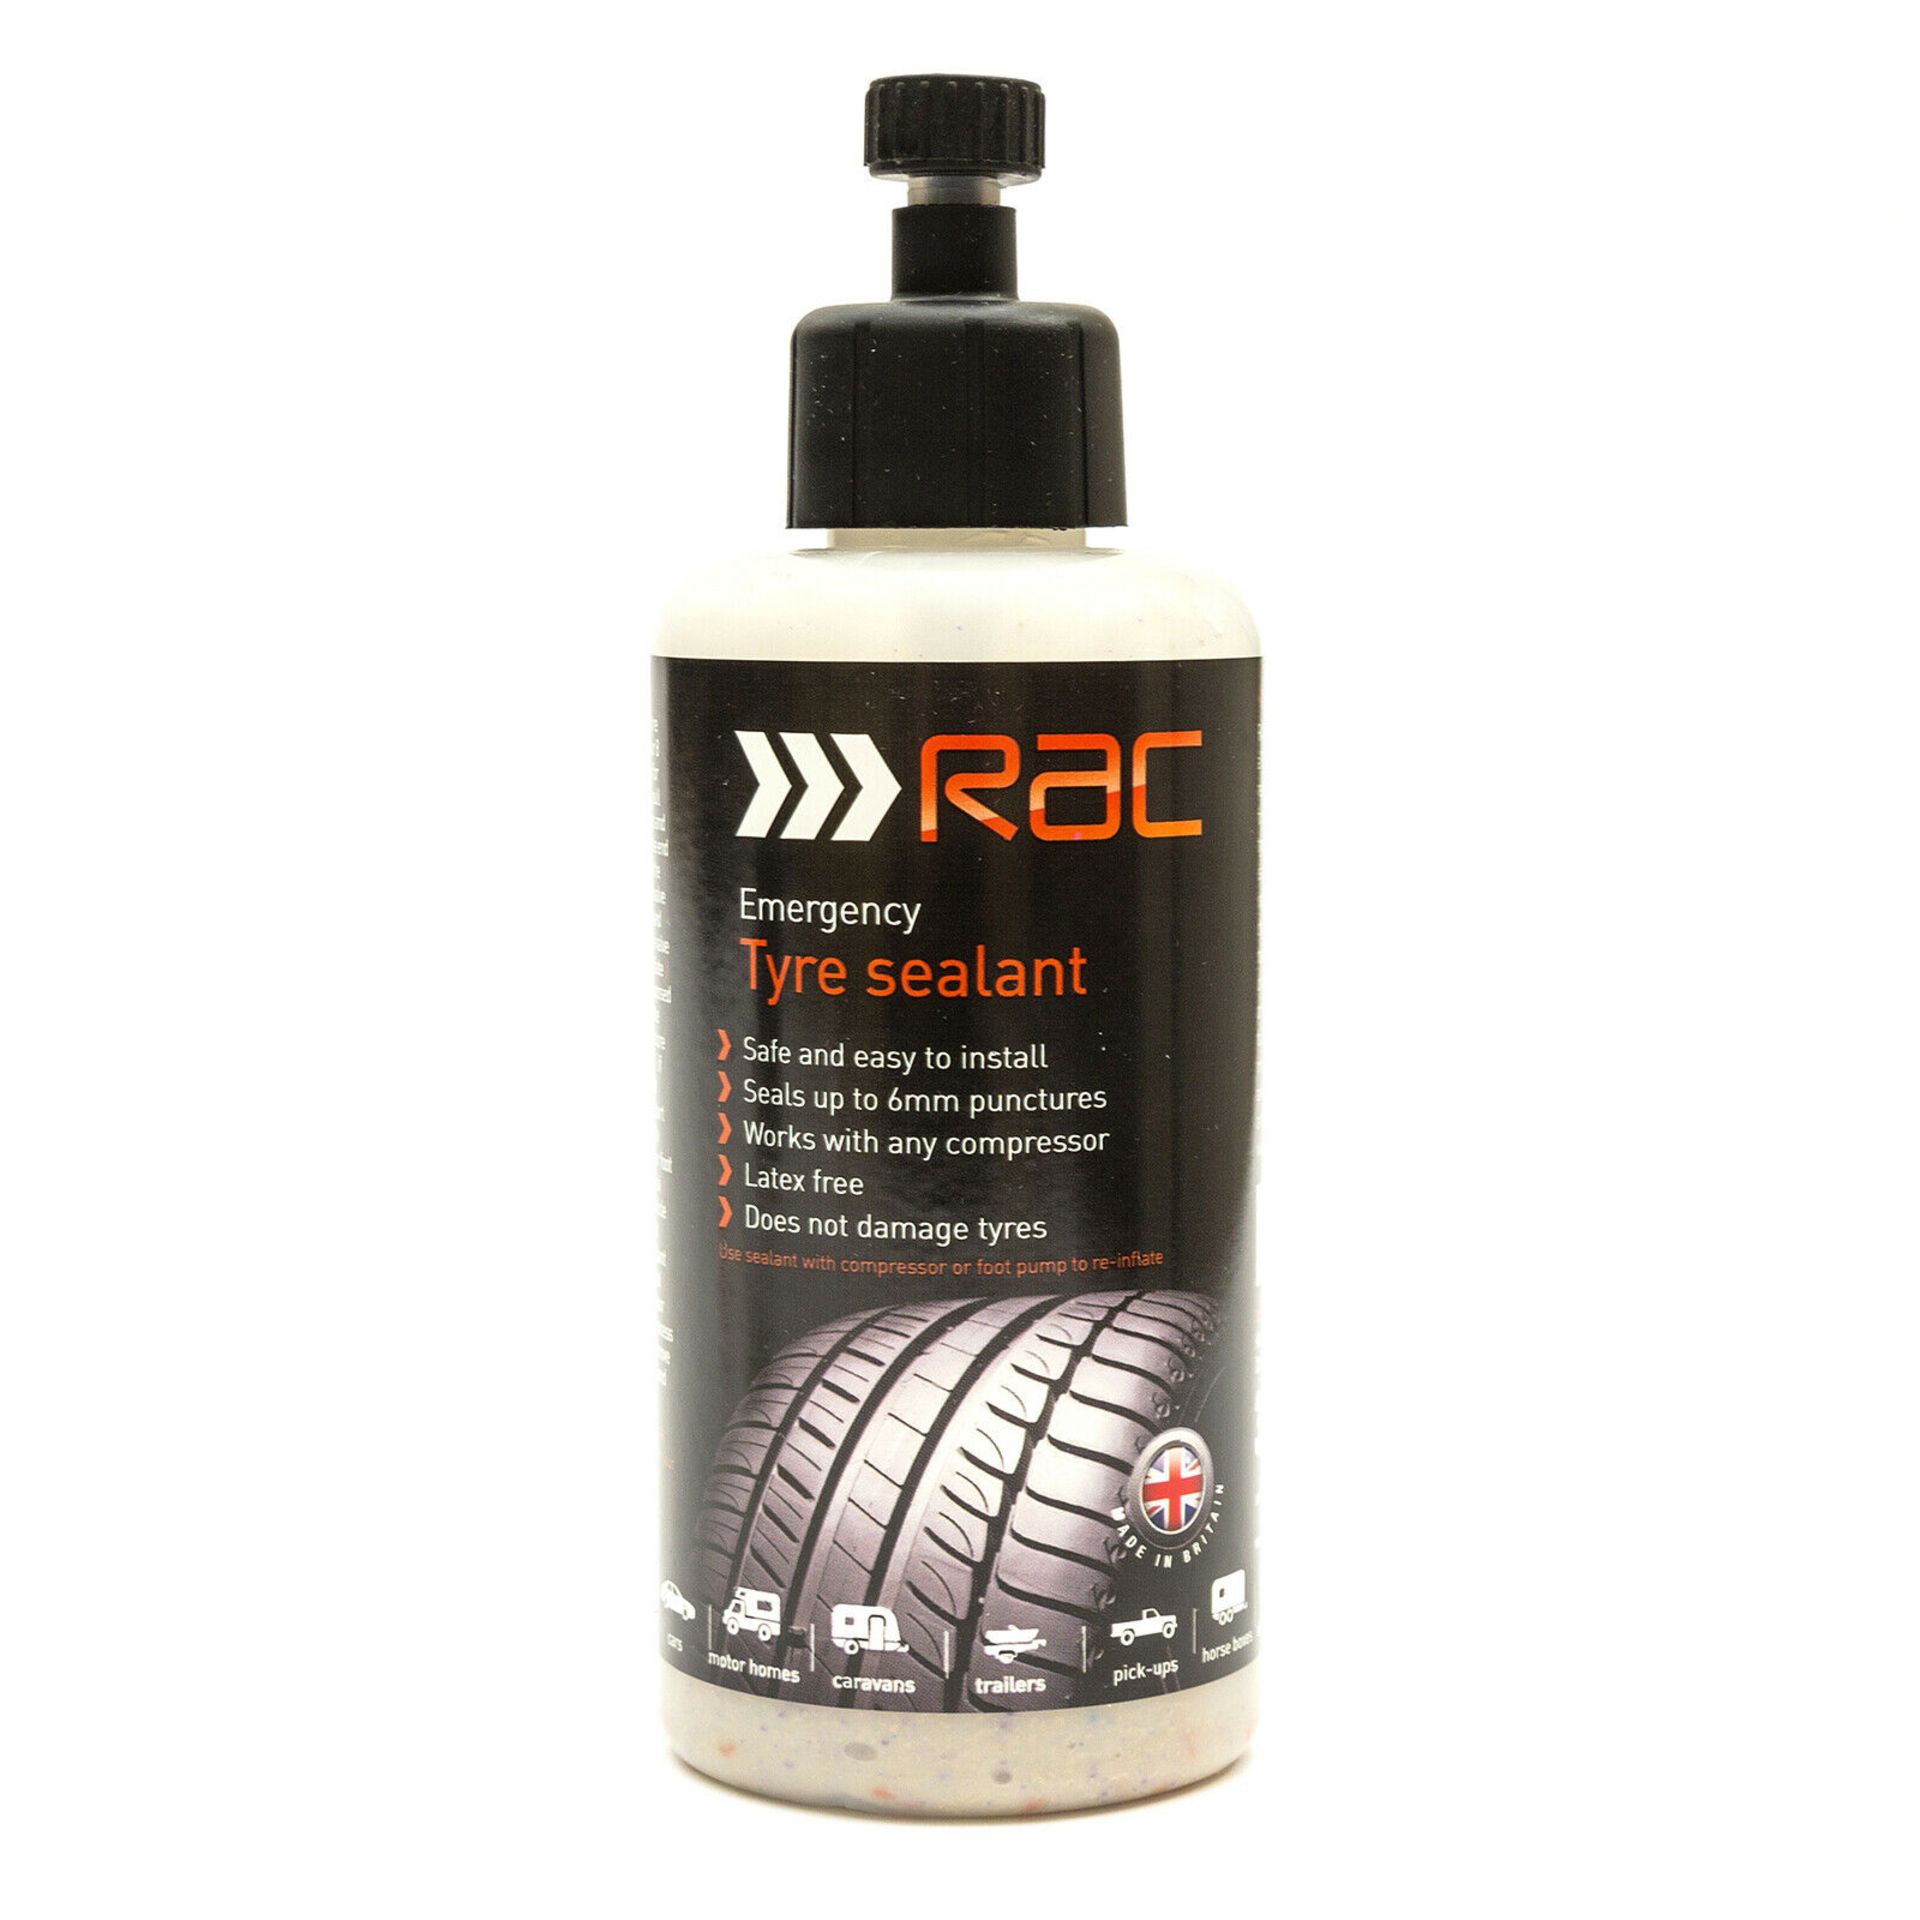 250 x RAC Emergency Tyre Sealant Puncture Repair Kits - New Boxed Resale Stock - Approx RRP £2,500! - Image 8 of 8